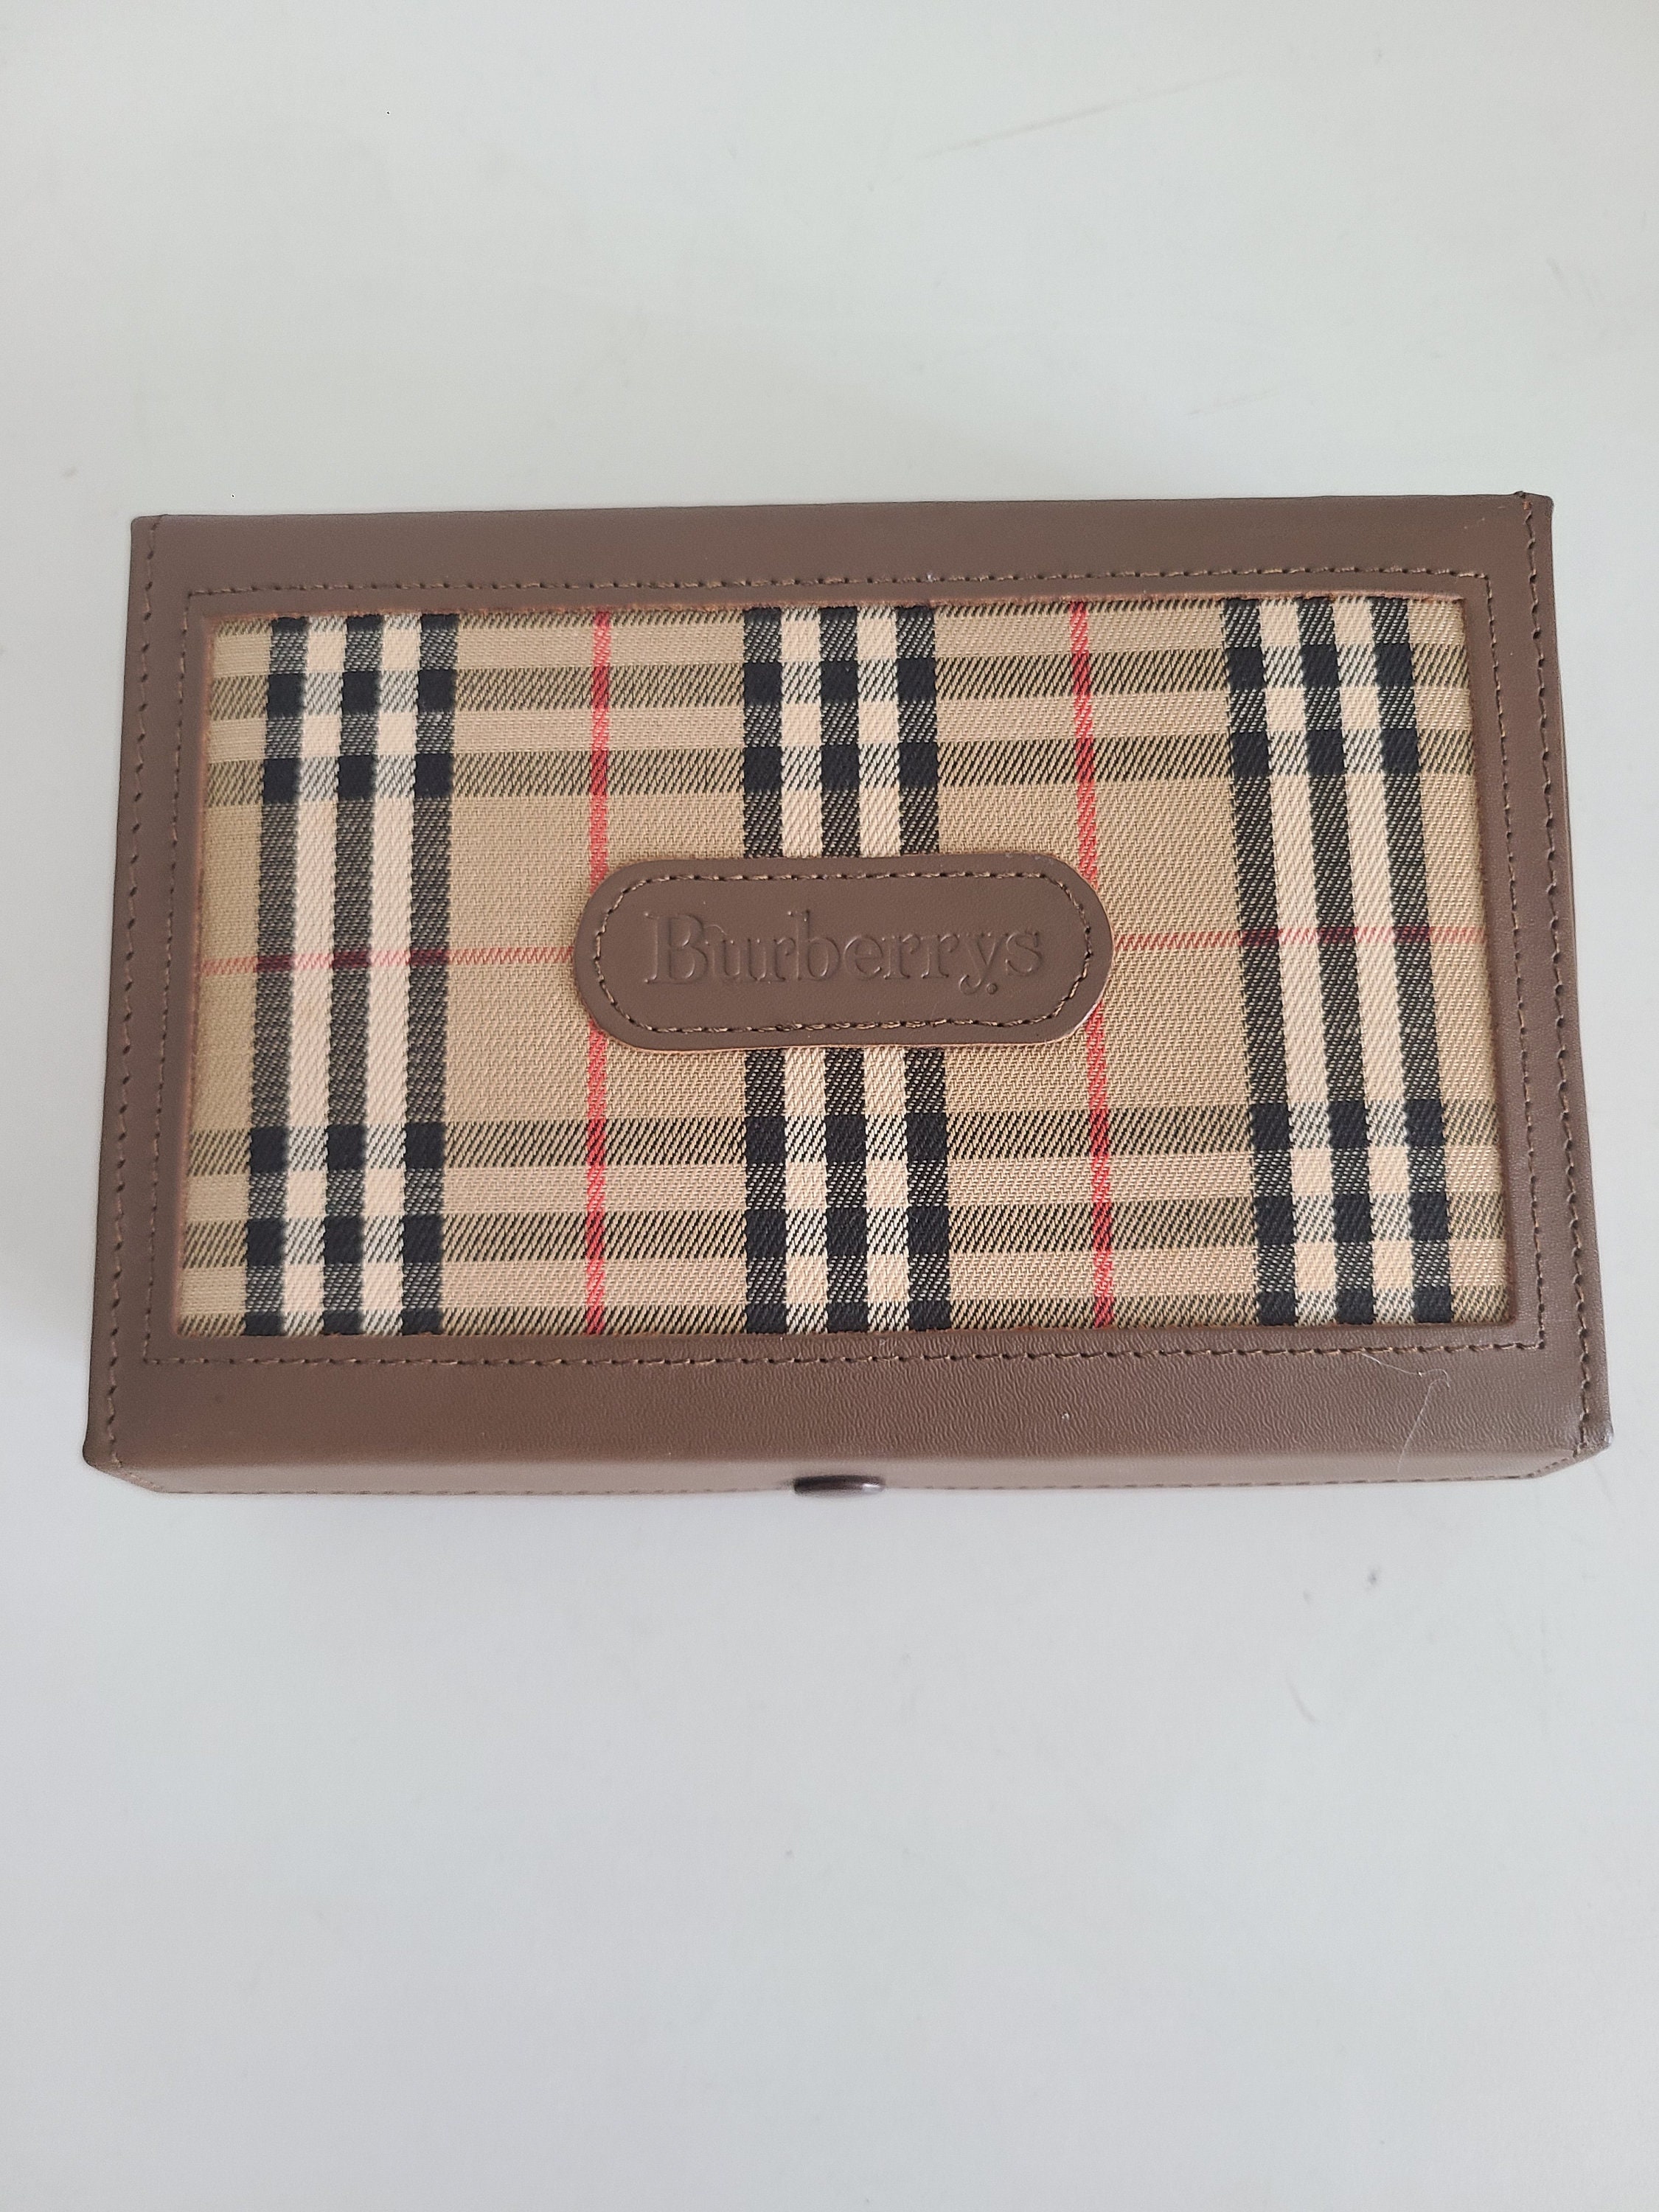 Super Rare Vintage Authentic Burberry Playing Card Set in 